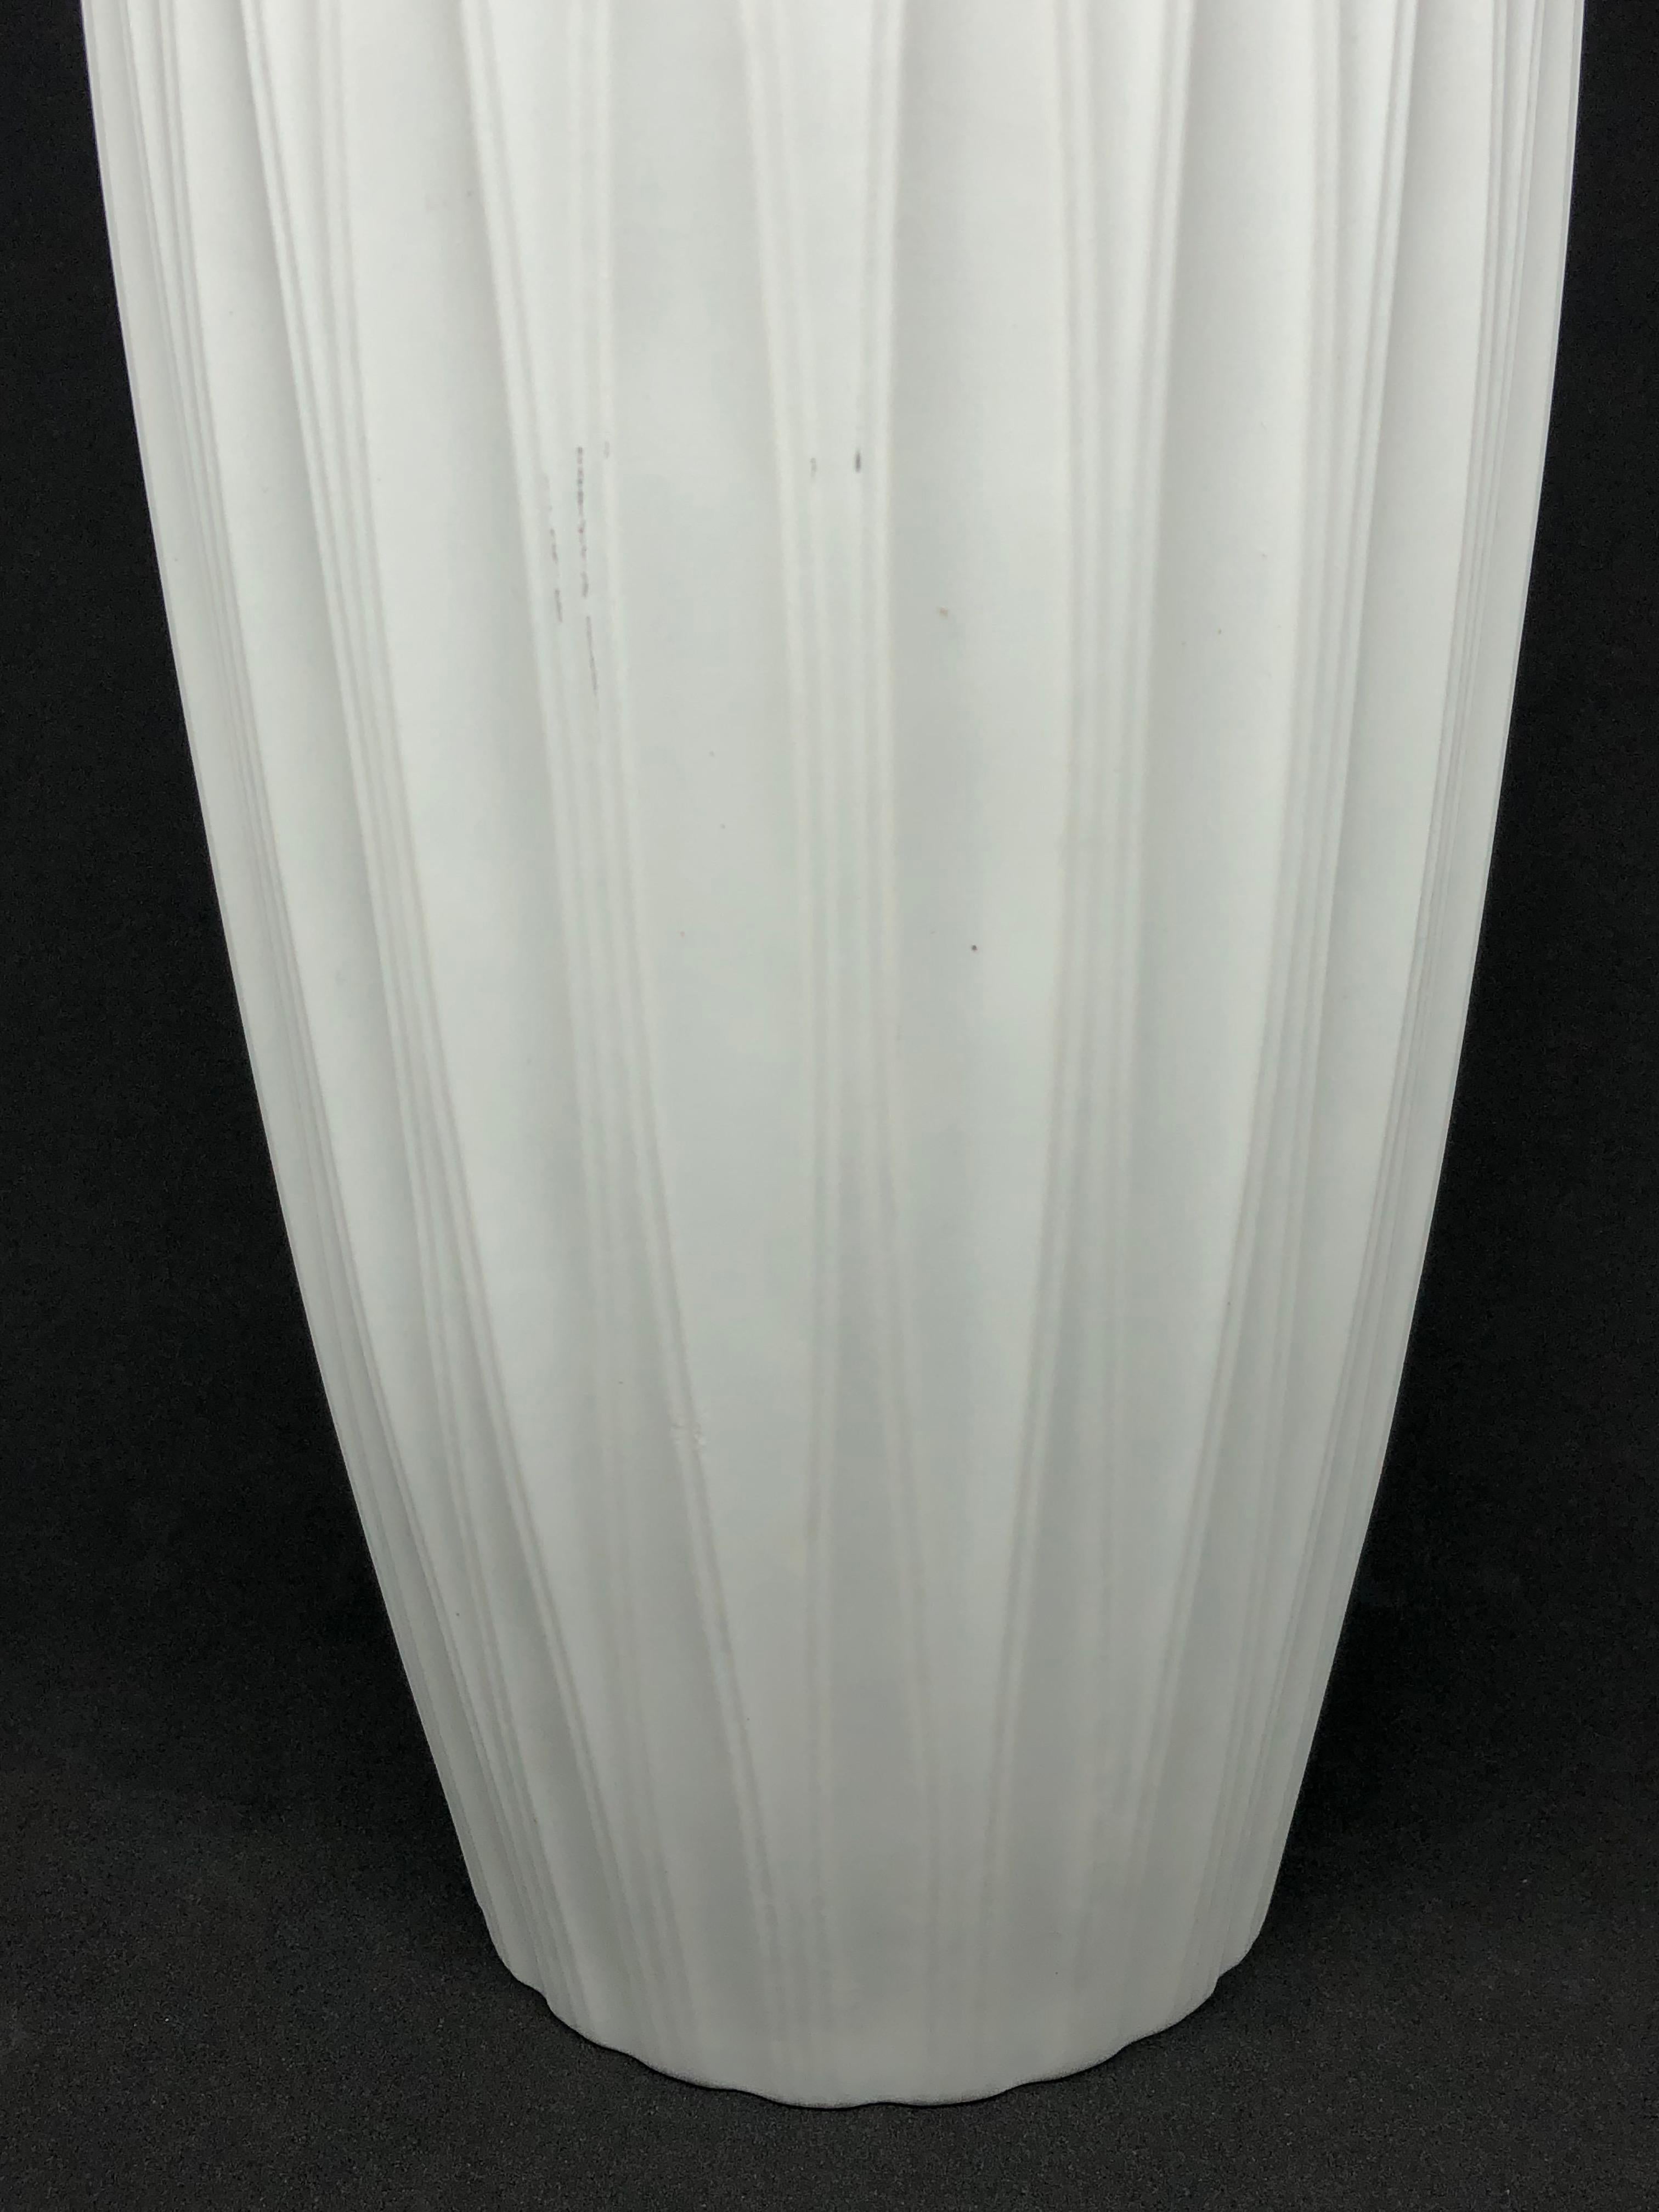 Late 20th Century Large Modernist Fluted White Bisque Vase by Hutschenreuther, Germany, 1970s For Sale